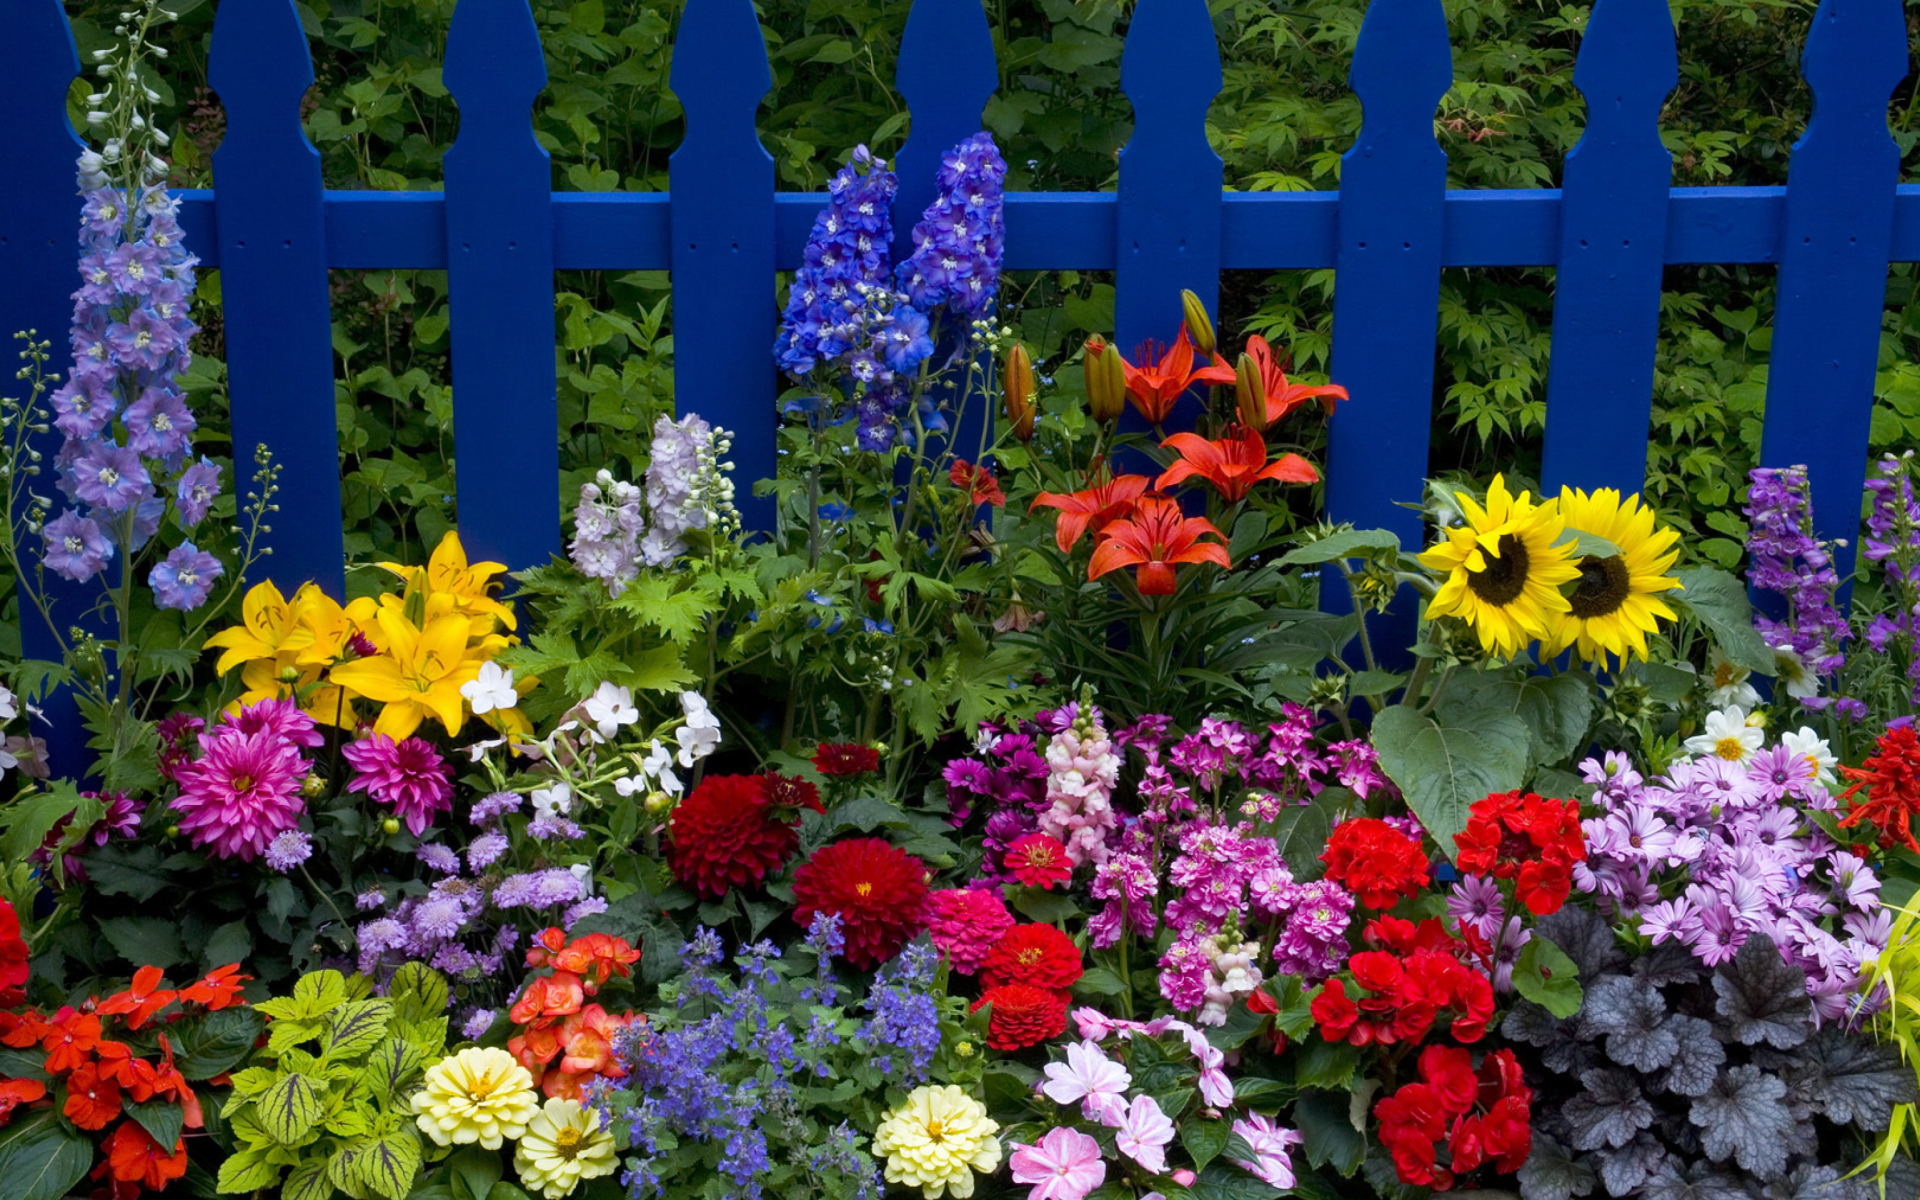 Garden Flowers In Front Of Bright Blue Fence screenshot #1 1920x1200